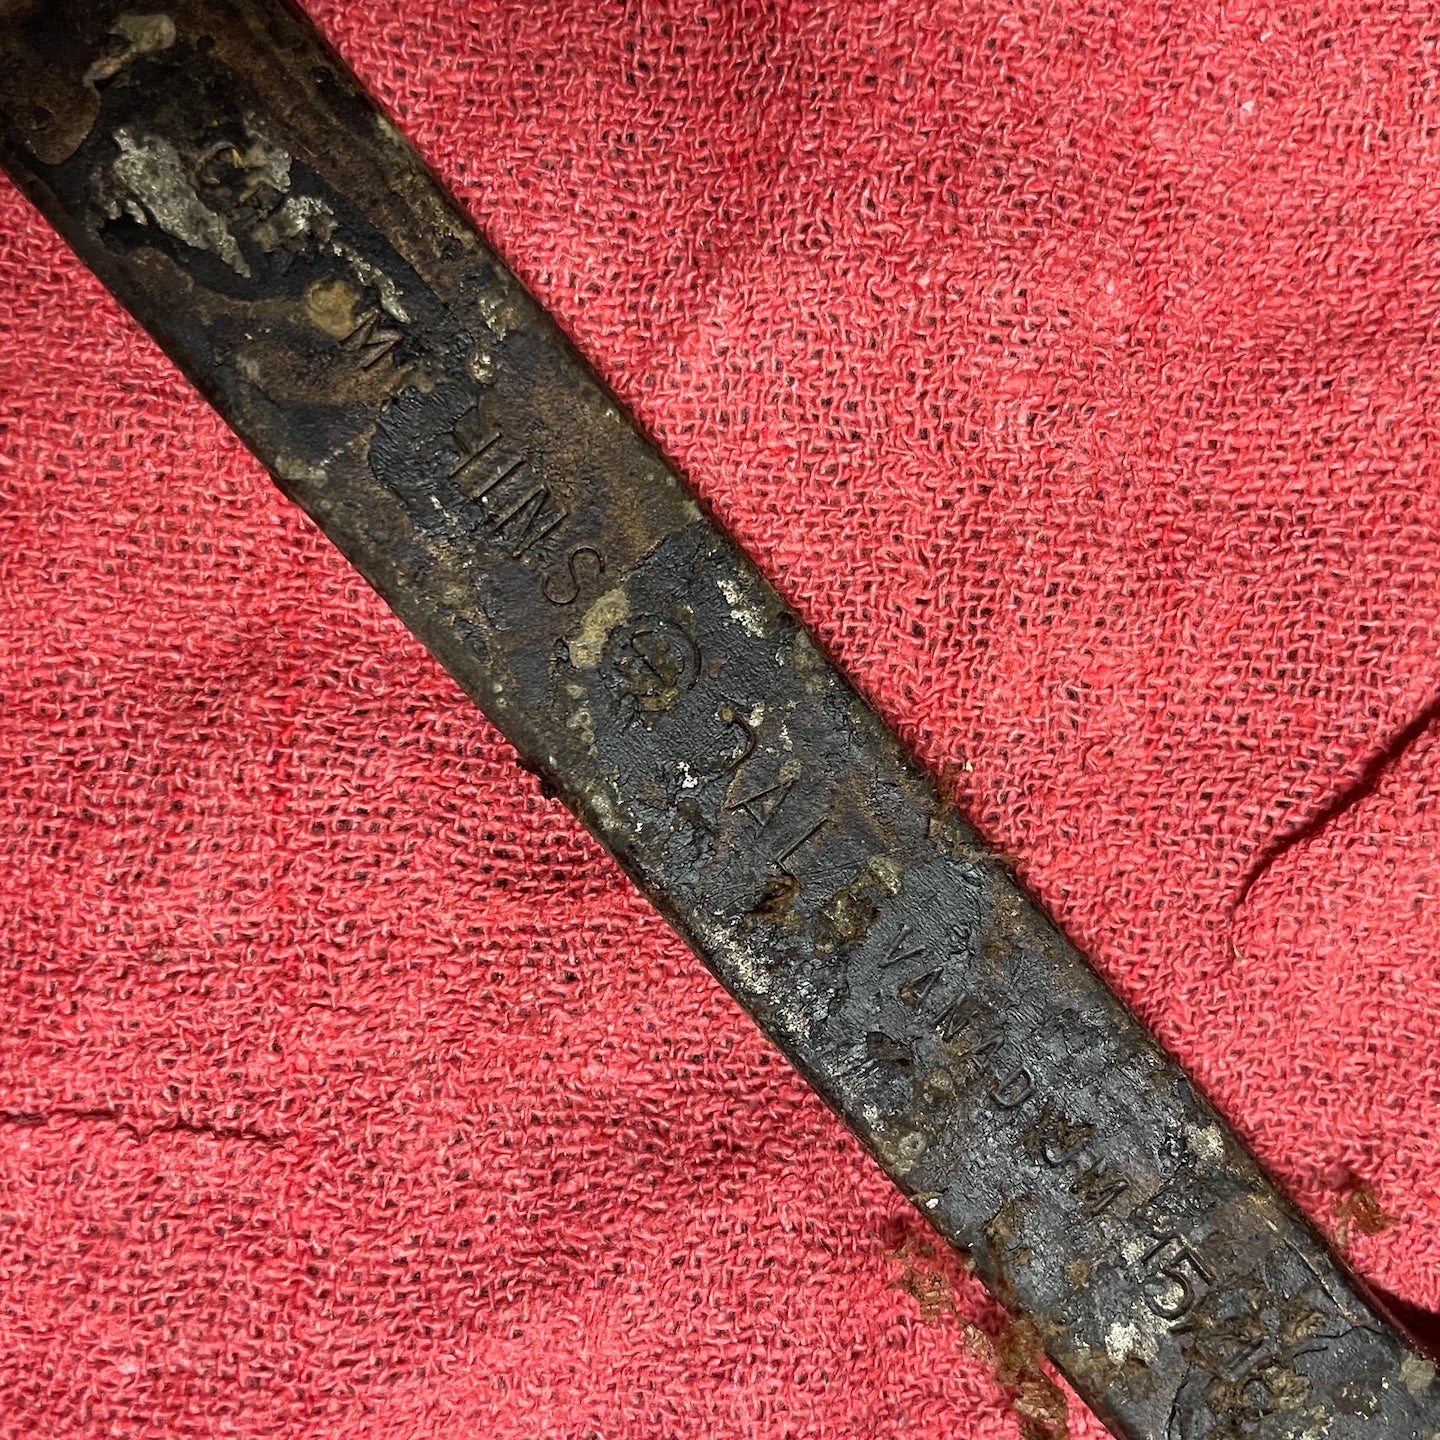 Hinsdale NOS WWII Era Open End 1" x 15/16" Wrench